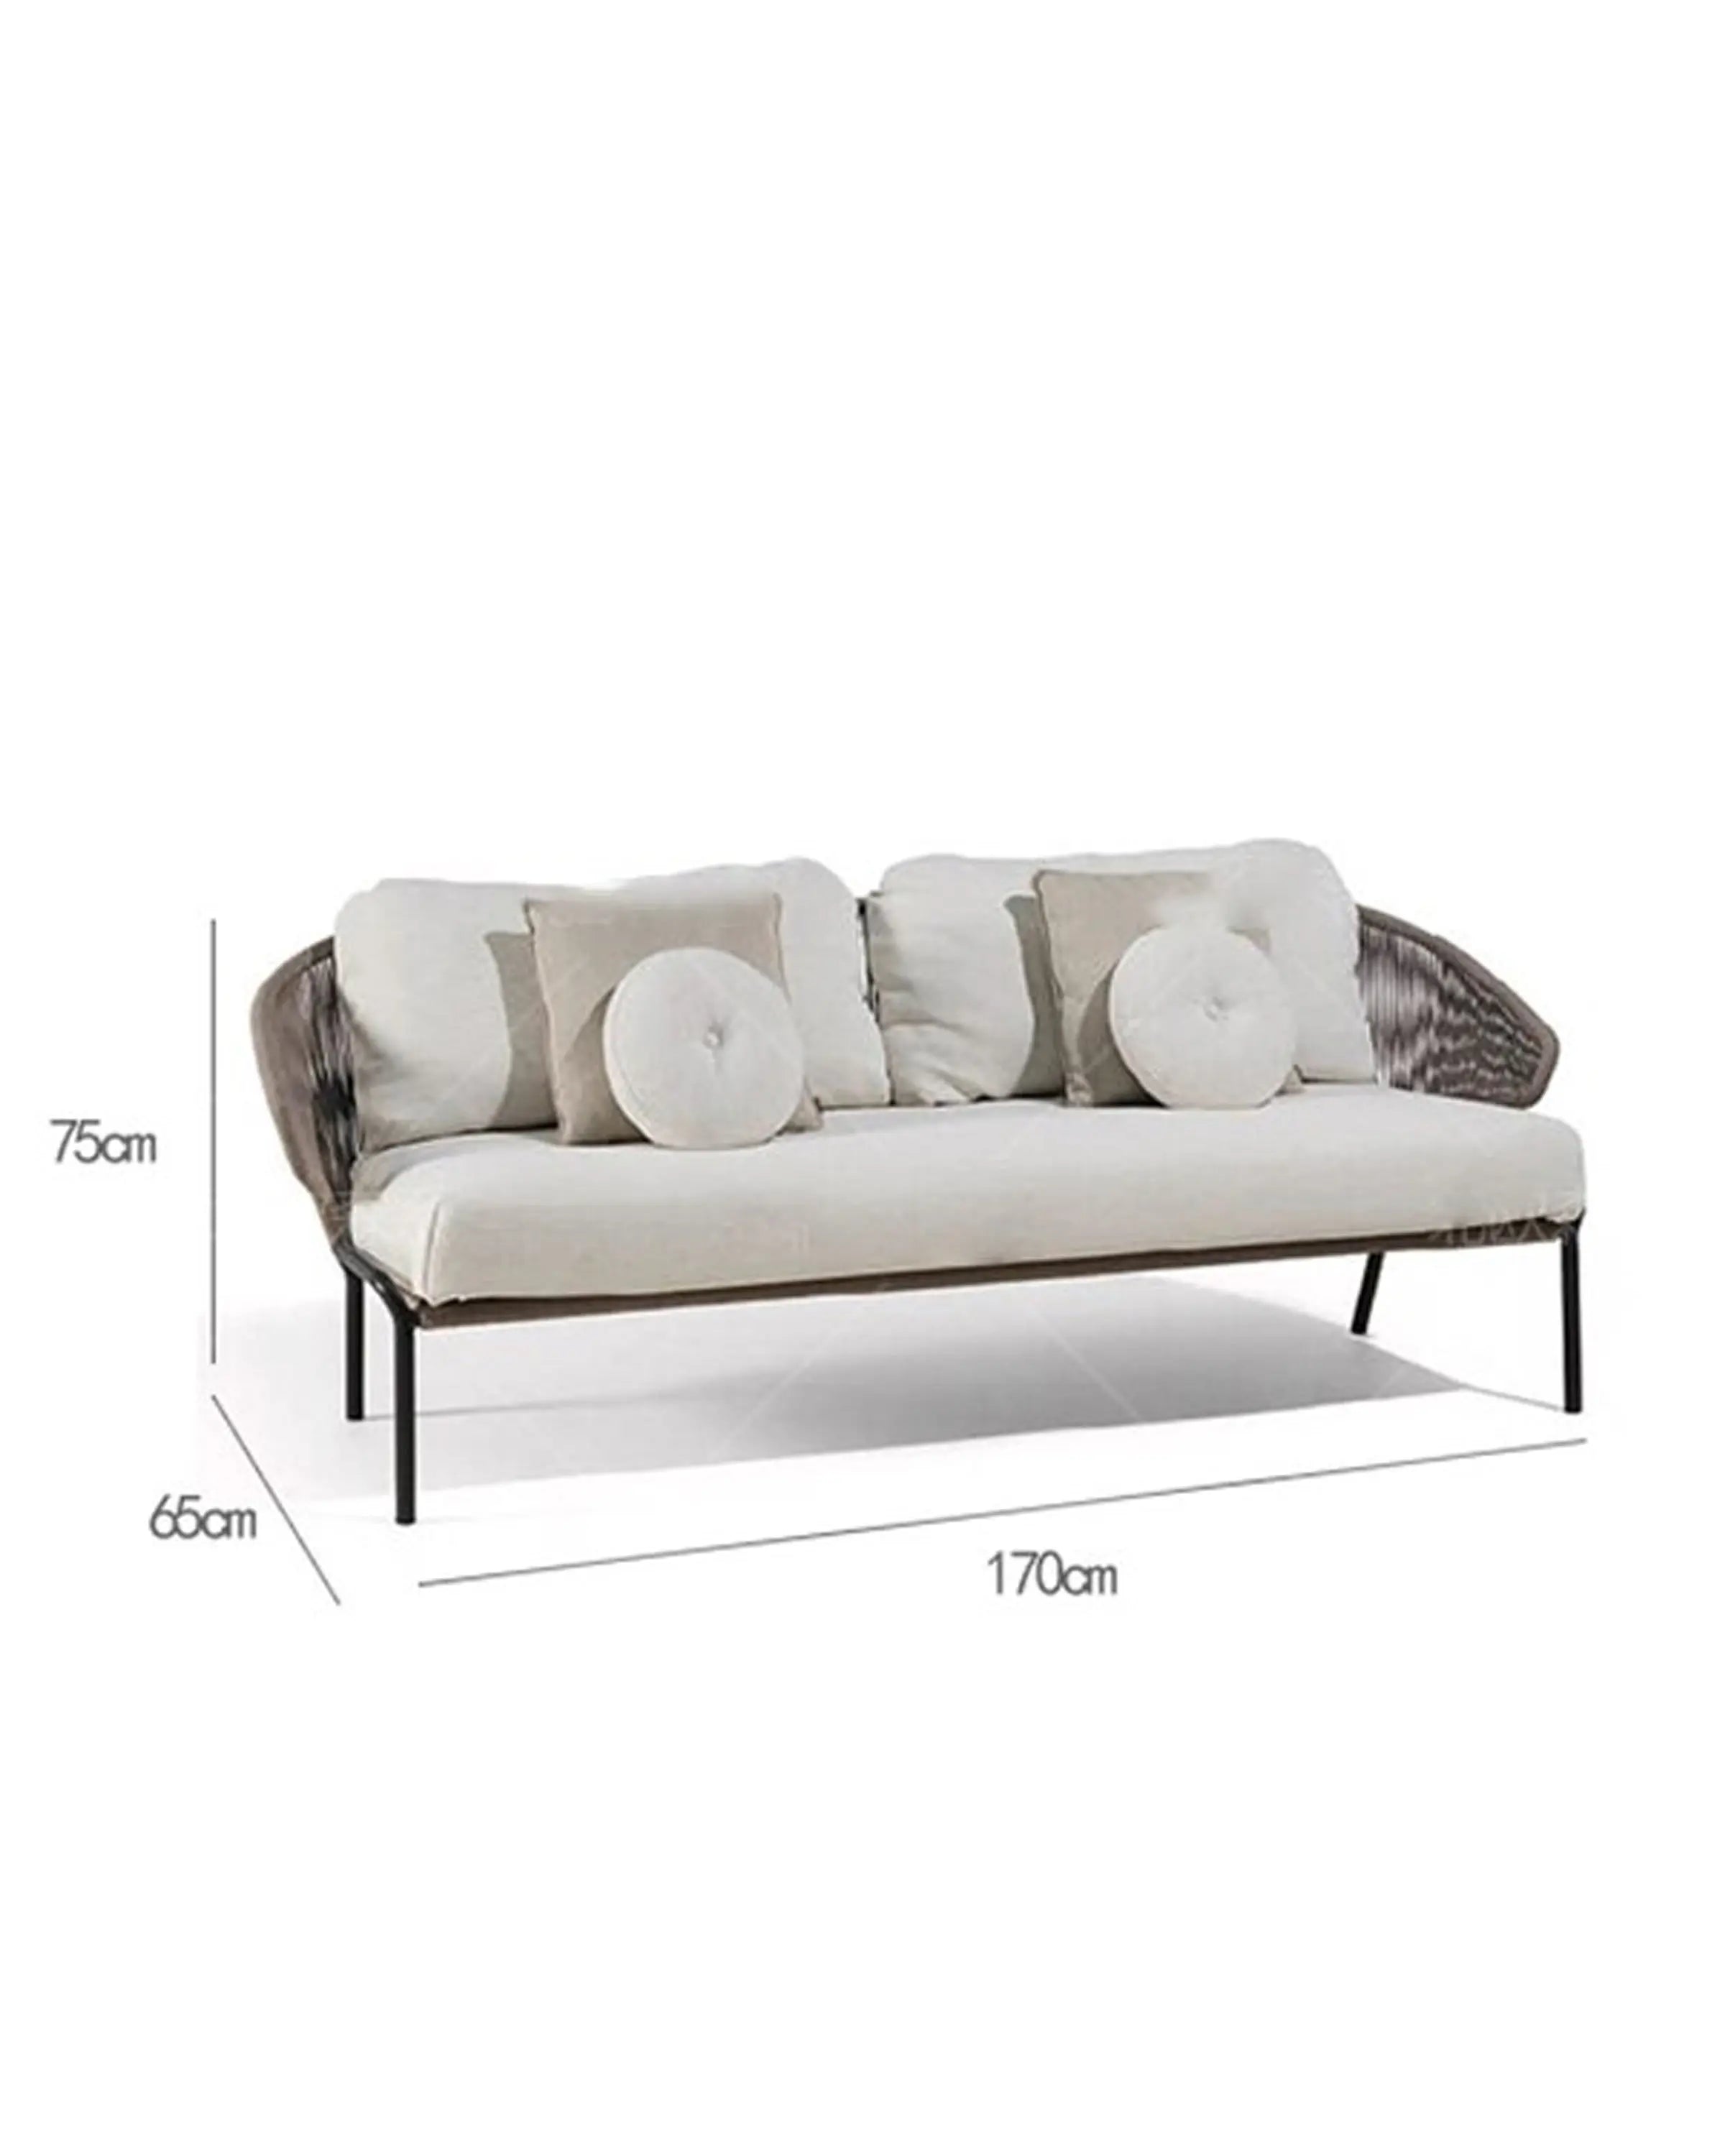 Nima Sofa Set - Out Door Furniture ANGIE HOMES